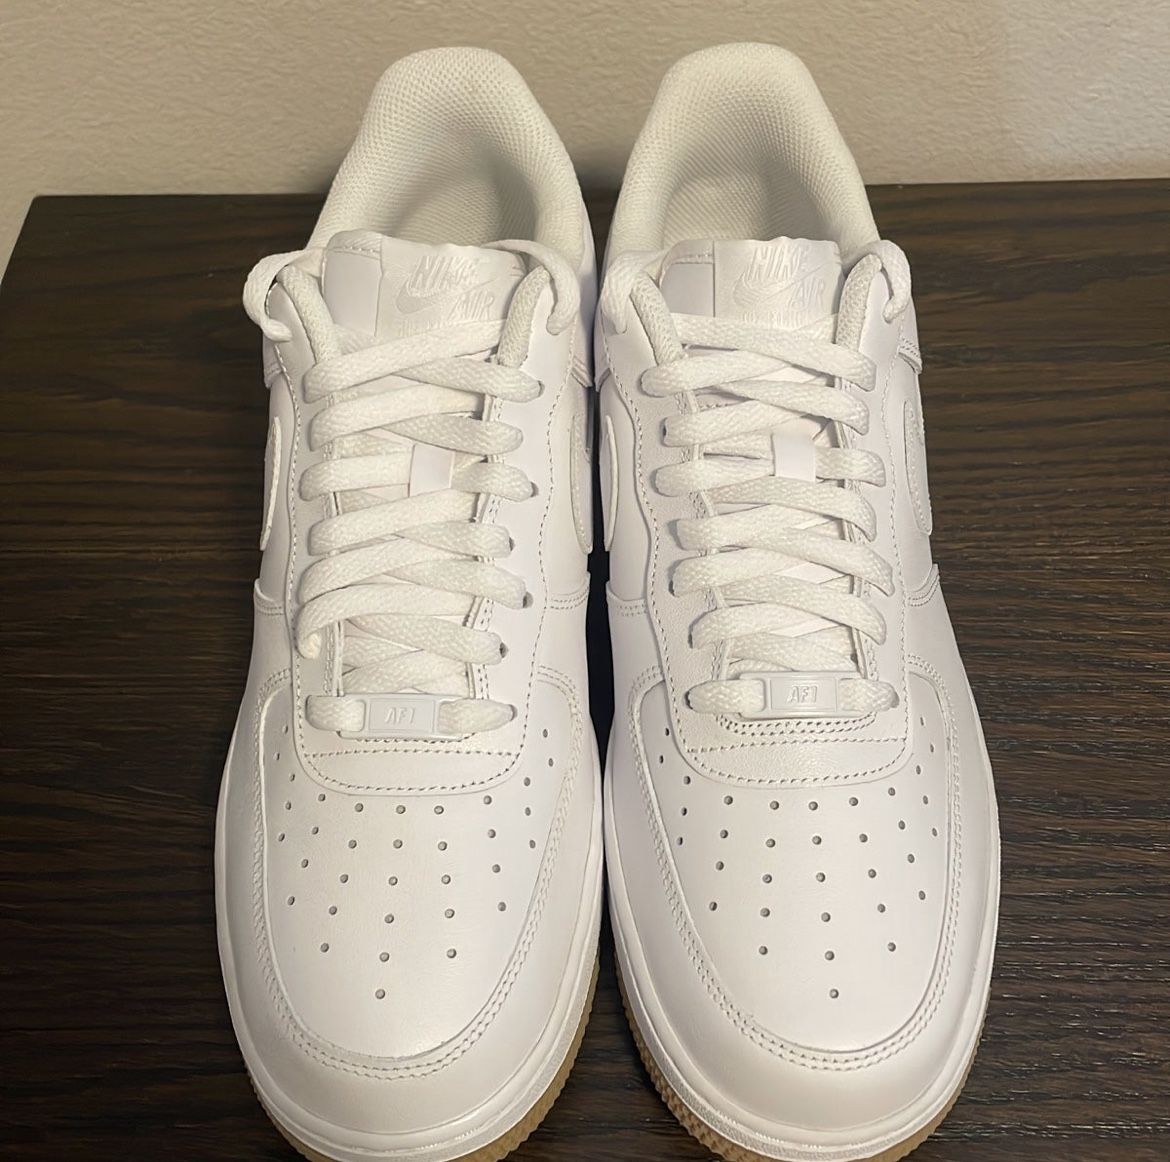 NIKE AIR FORCE 1 SIZE 10